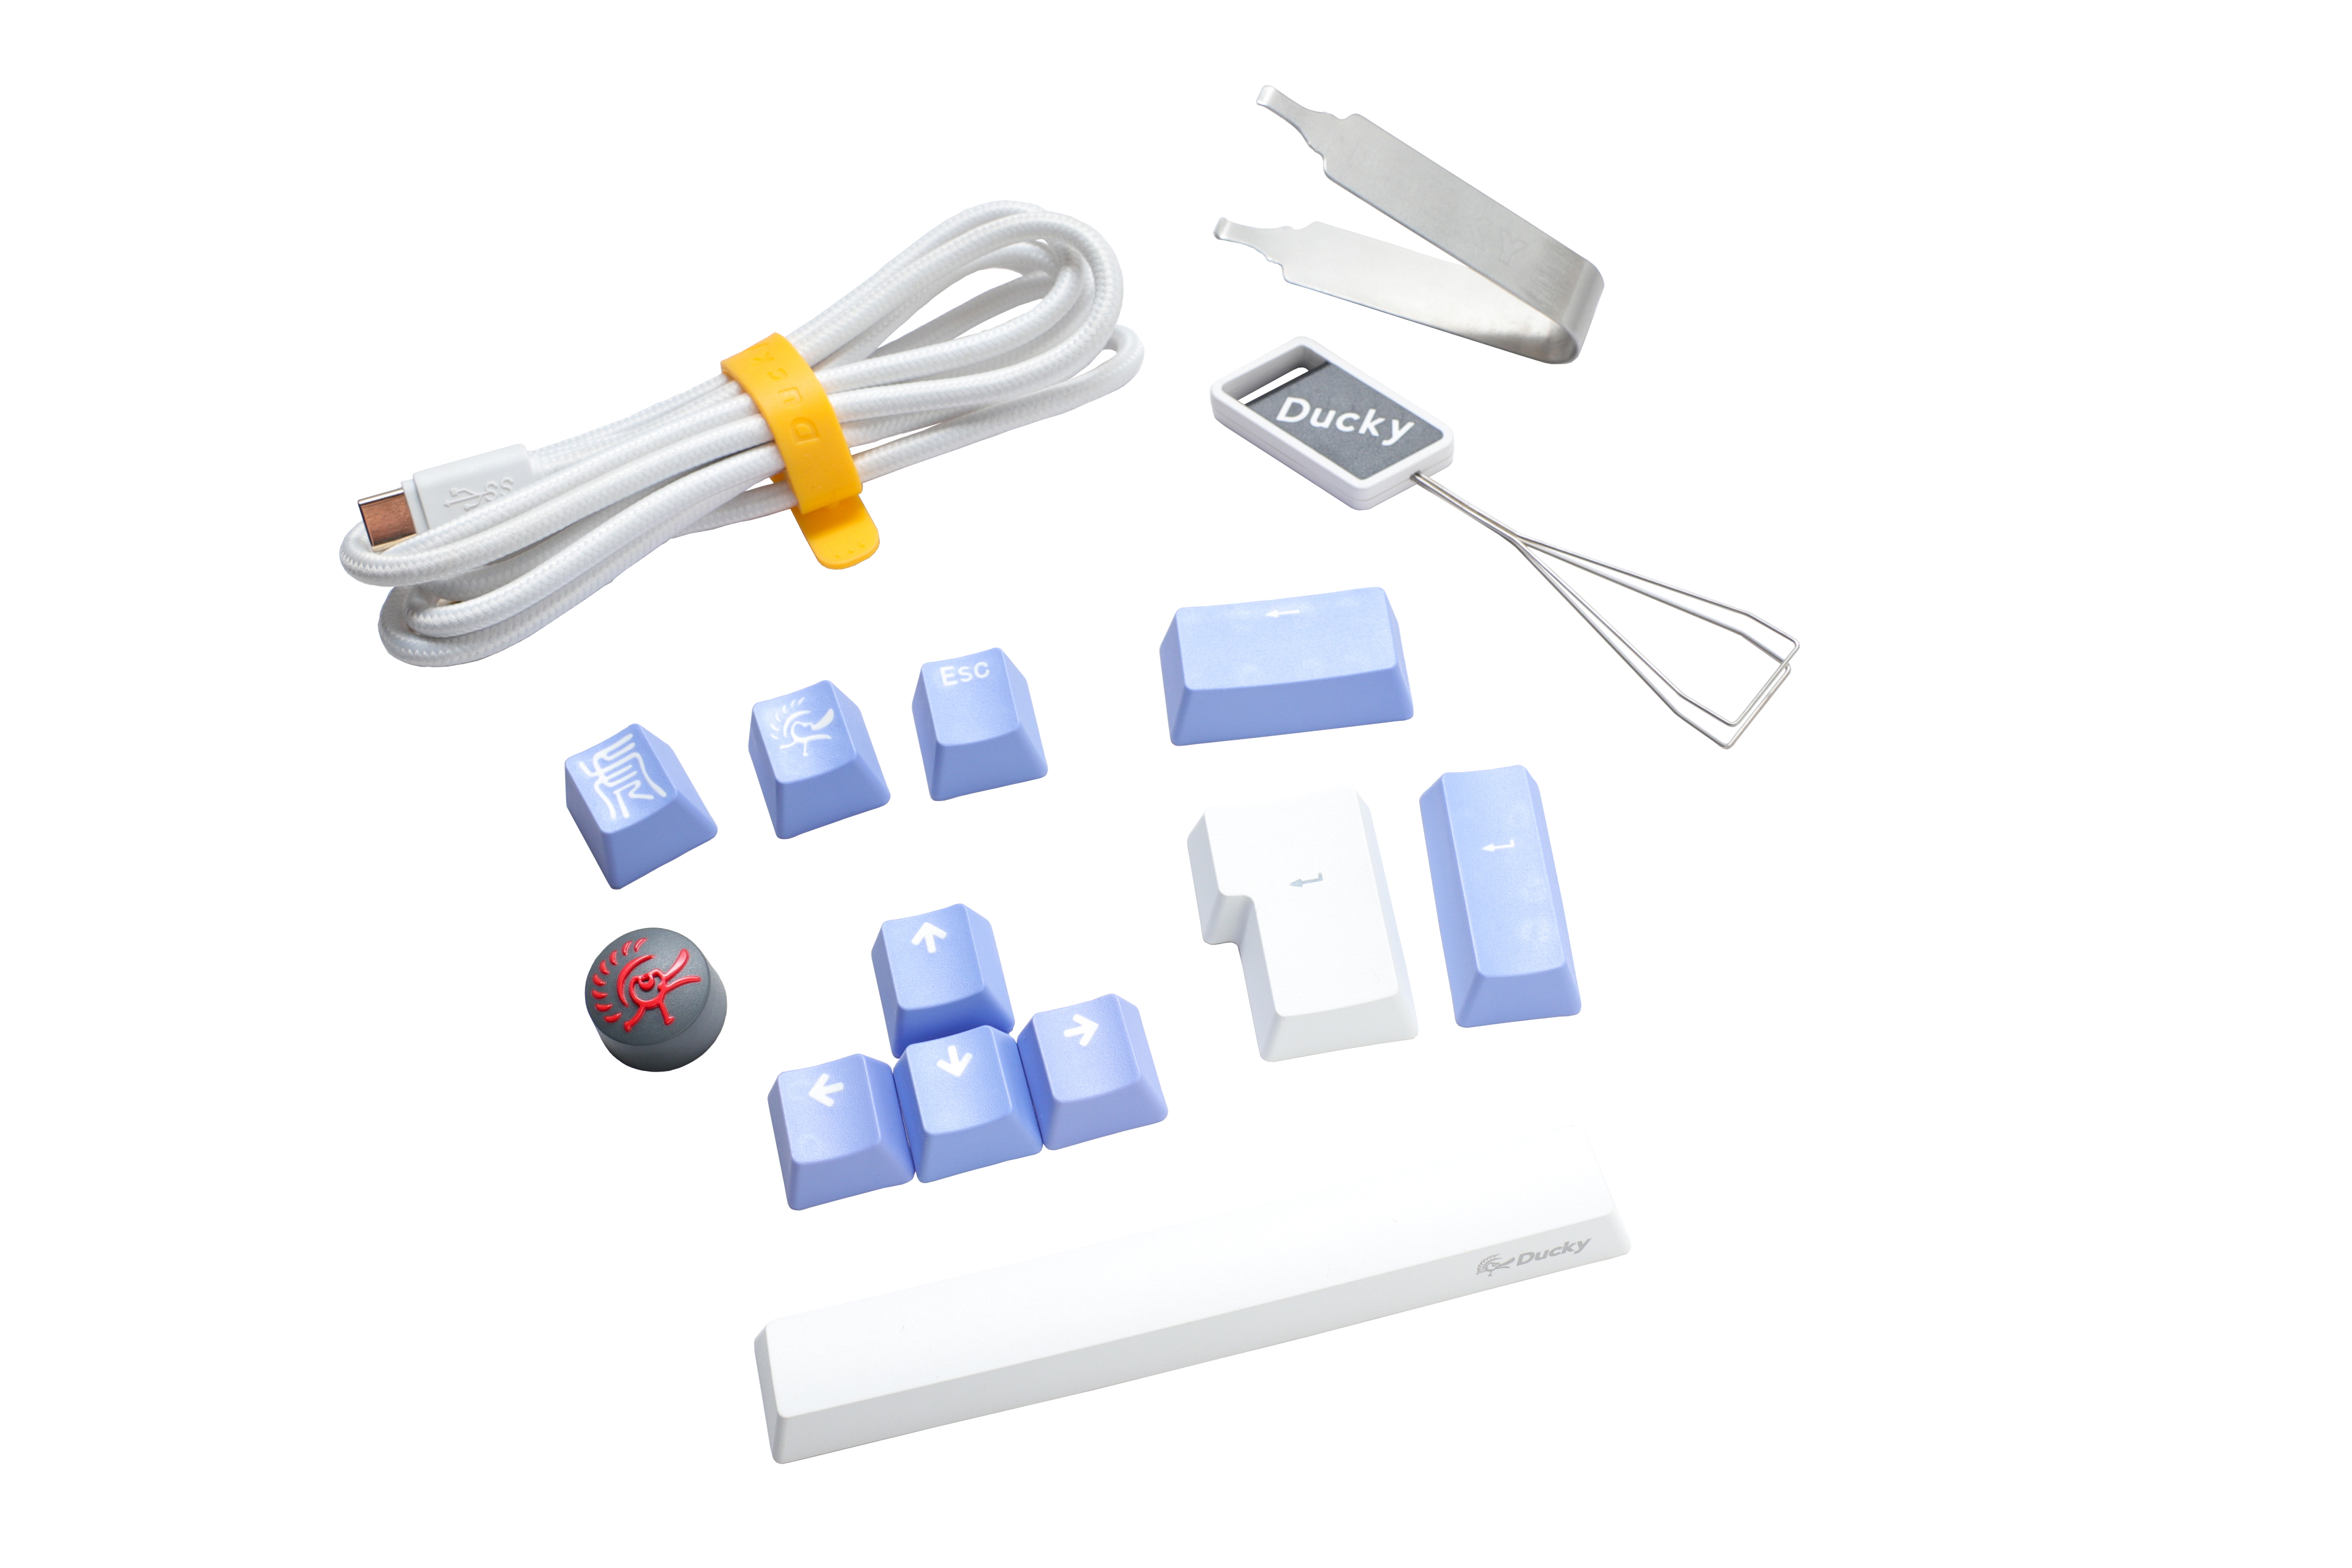 Assorted computer keyboard accessories including a white USB cable, a Ducky branded wire keycap puller, blue PBT keycaps, a red Cherry MX key switch, and silicone stabilizers.